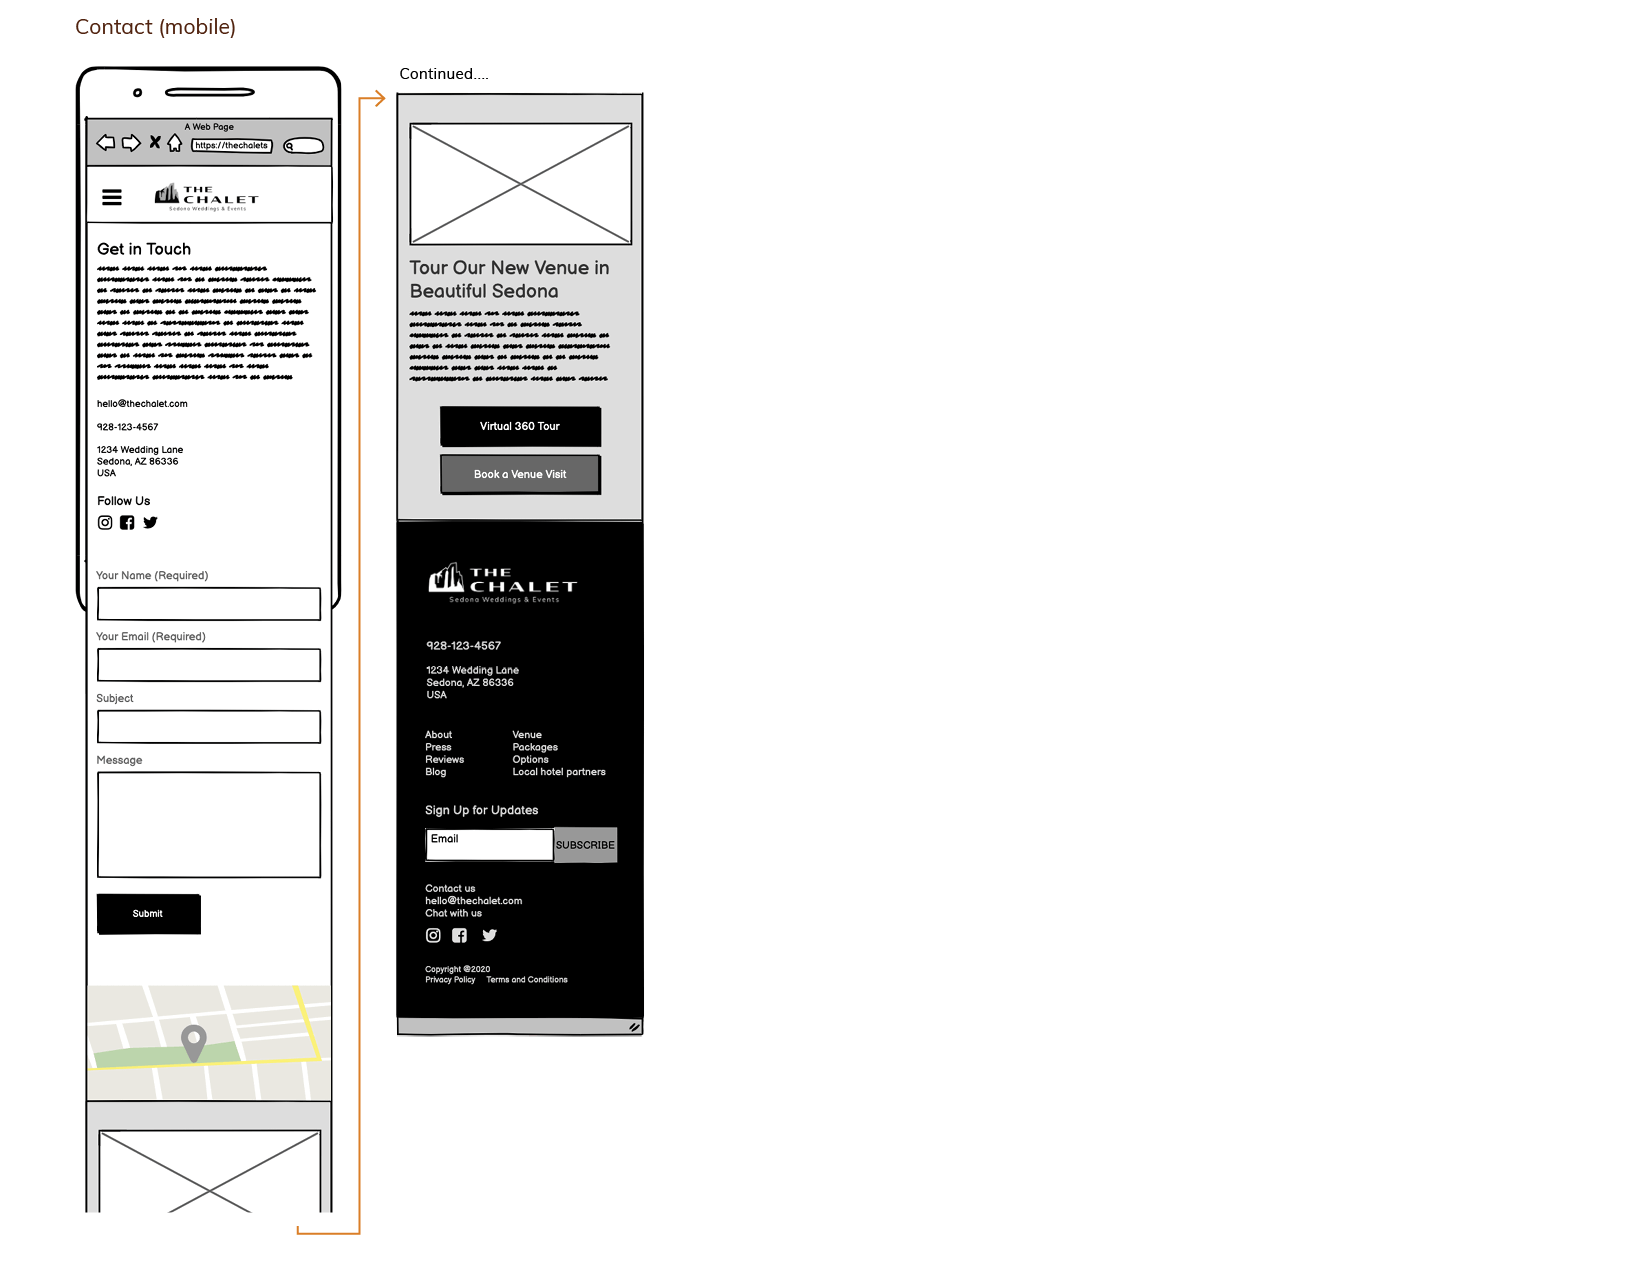 The Chalet wireframe - Contact page, mobile